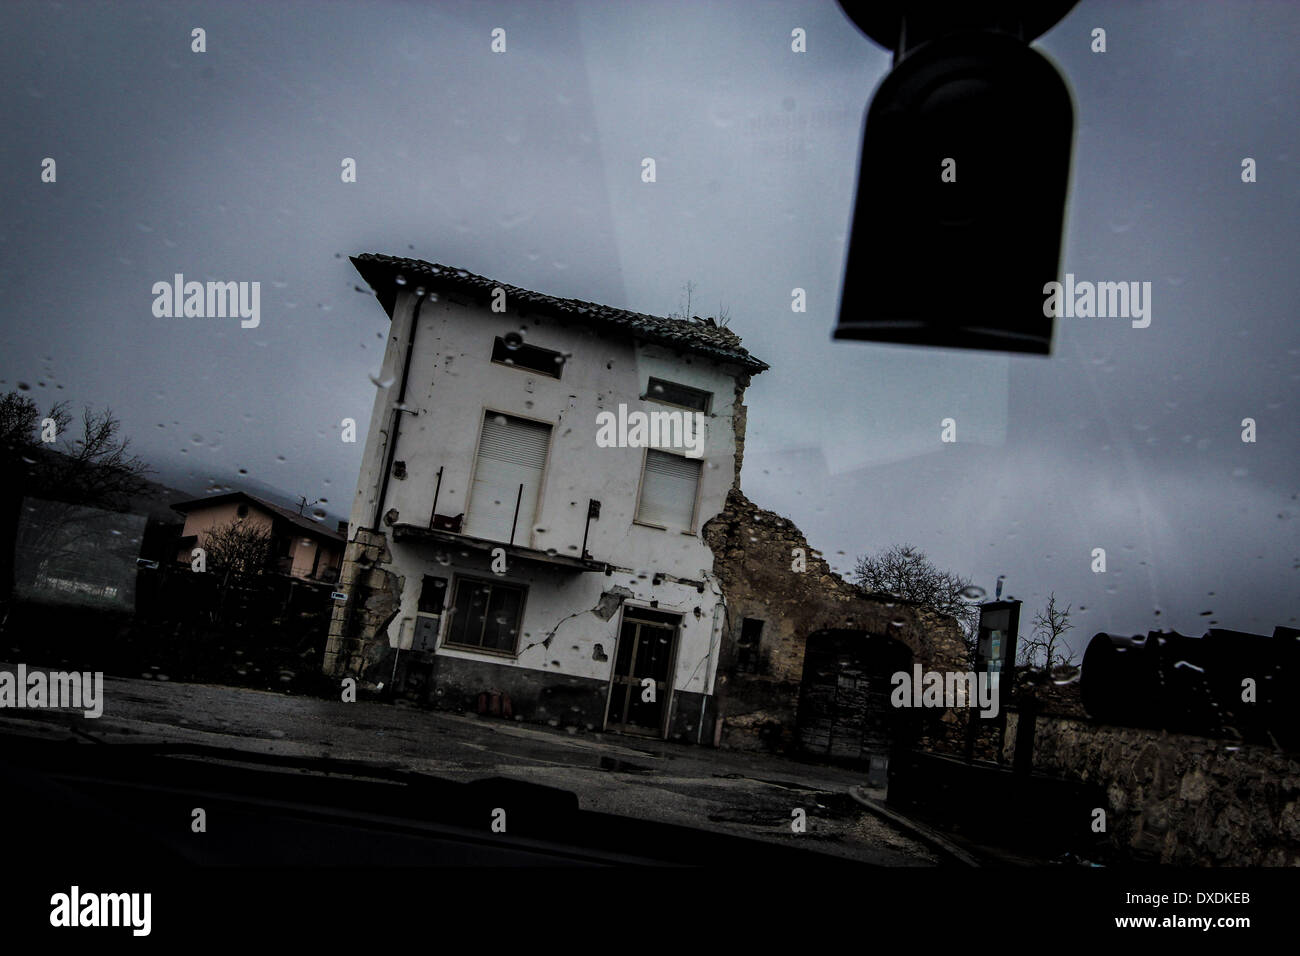 March 24, 2014 - L'Aquila, Italy - A damaged building in Onna, L'Aquila, on March 24, 2014. Onna one of the countries most affected by the earthquake of April 6, 2009 with the highest number of deaths, 40. Most of the buildings of the town are destroyed and other buildings have suffered serious damage. Five years after the earthquake, the inhabitants live in the new wooden houses built with the contribution of the Autonomous Province of Trento. (Credit Image: © Manuel Romano/NurPhoto/ZUMAPRESS.com) Stock Photo